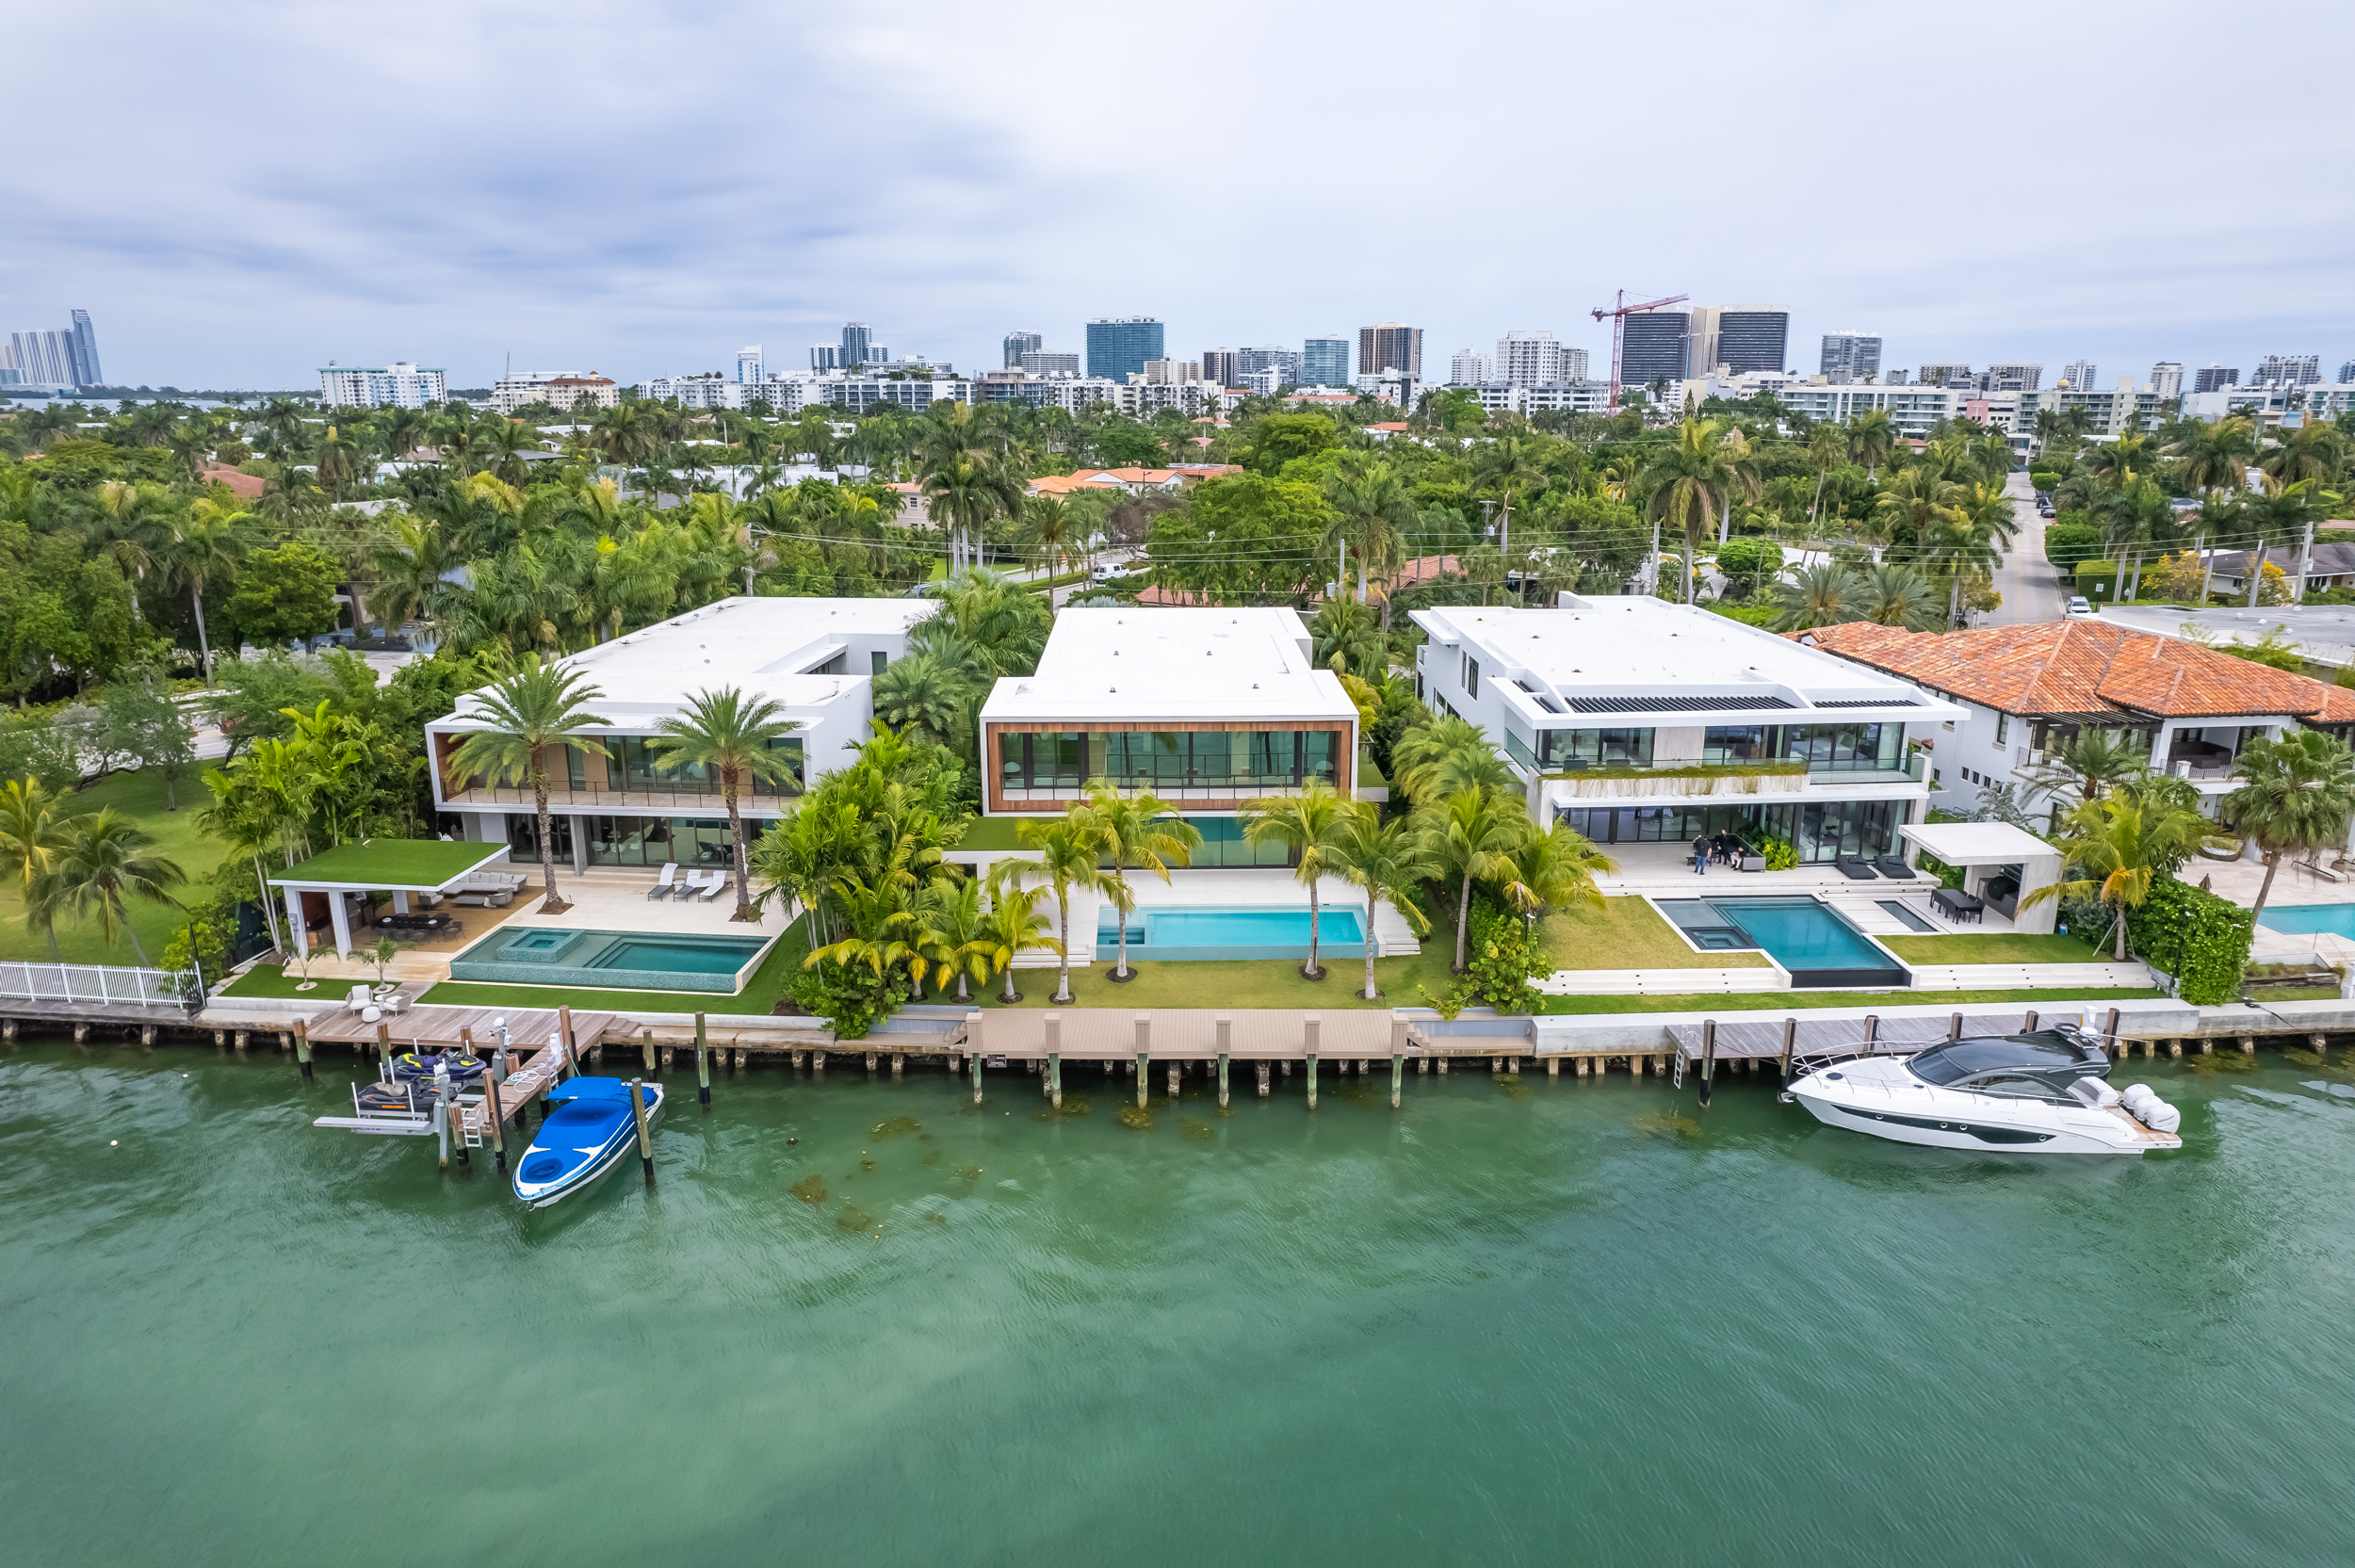 Record-Breaking $18 Million Sale Marks Bay Harbor Islands’ Priciest Single-Family Home Transaction